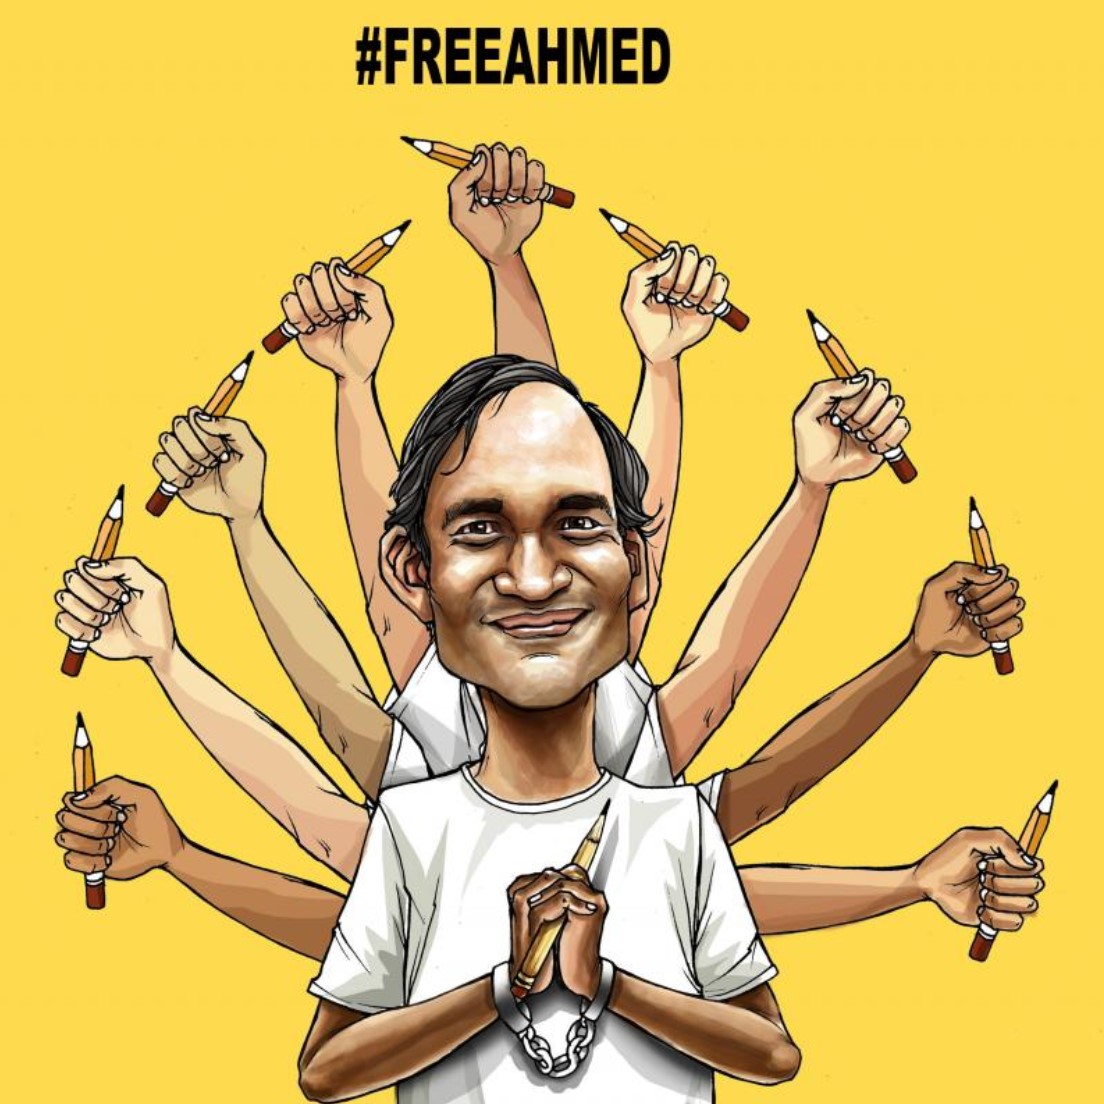 We are pleased to hear cartoonist Ahmed Kabir Kishore will be granted a bail after ten months in prison. But many questions remain about his allegations of violence and the death of his co-accused Mushtaq Ahmed. Cartoon by @rodriguezmonos cartoonmovement.com/cartoon/freedo… #freekishore